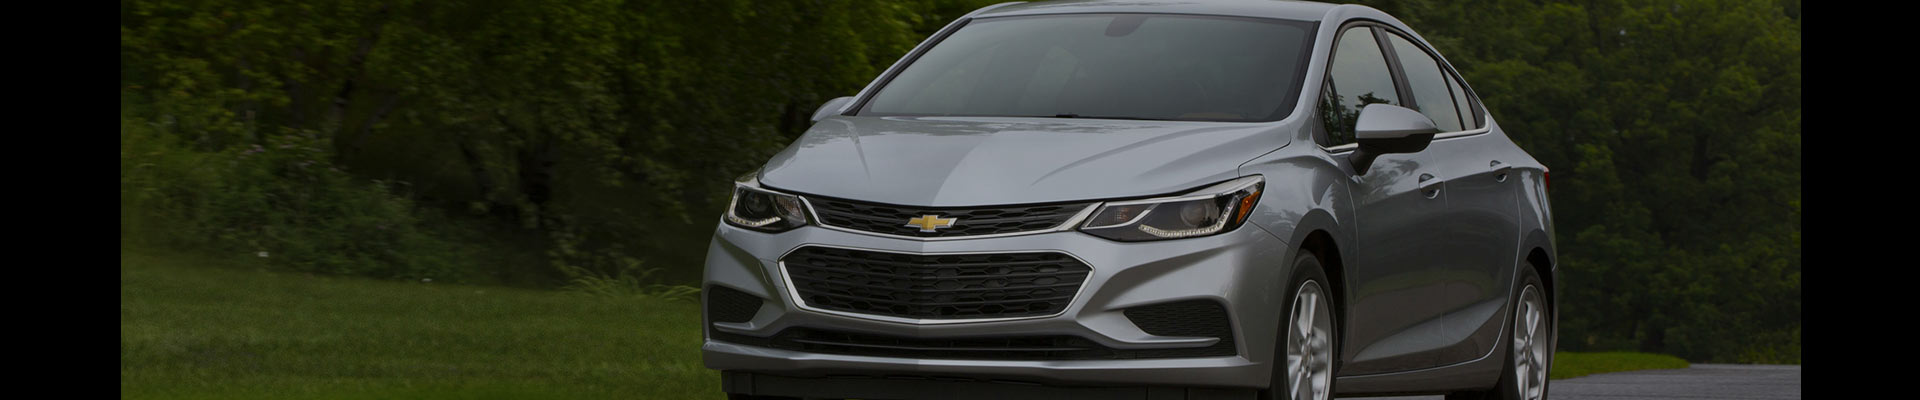 Shop Replacement and OEM 2018 Chevrolet Cruze Parts with Discounted Price on the Net